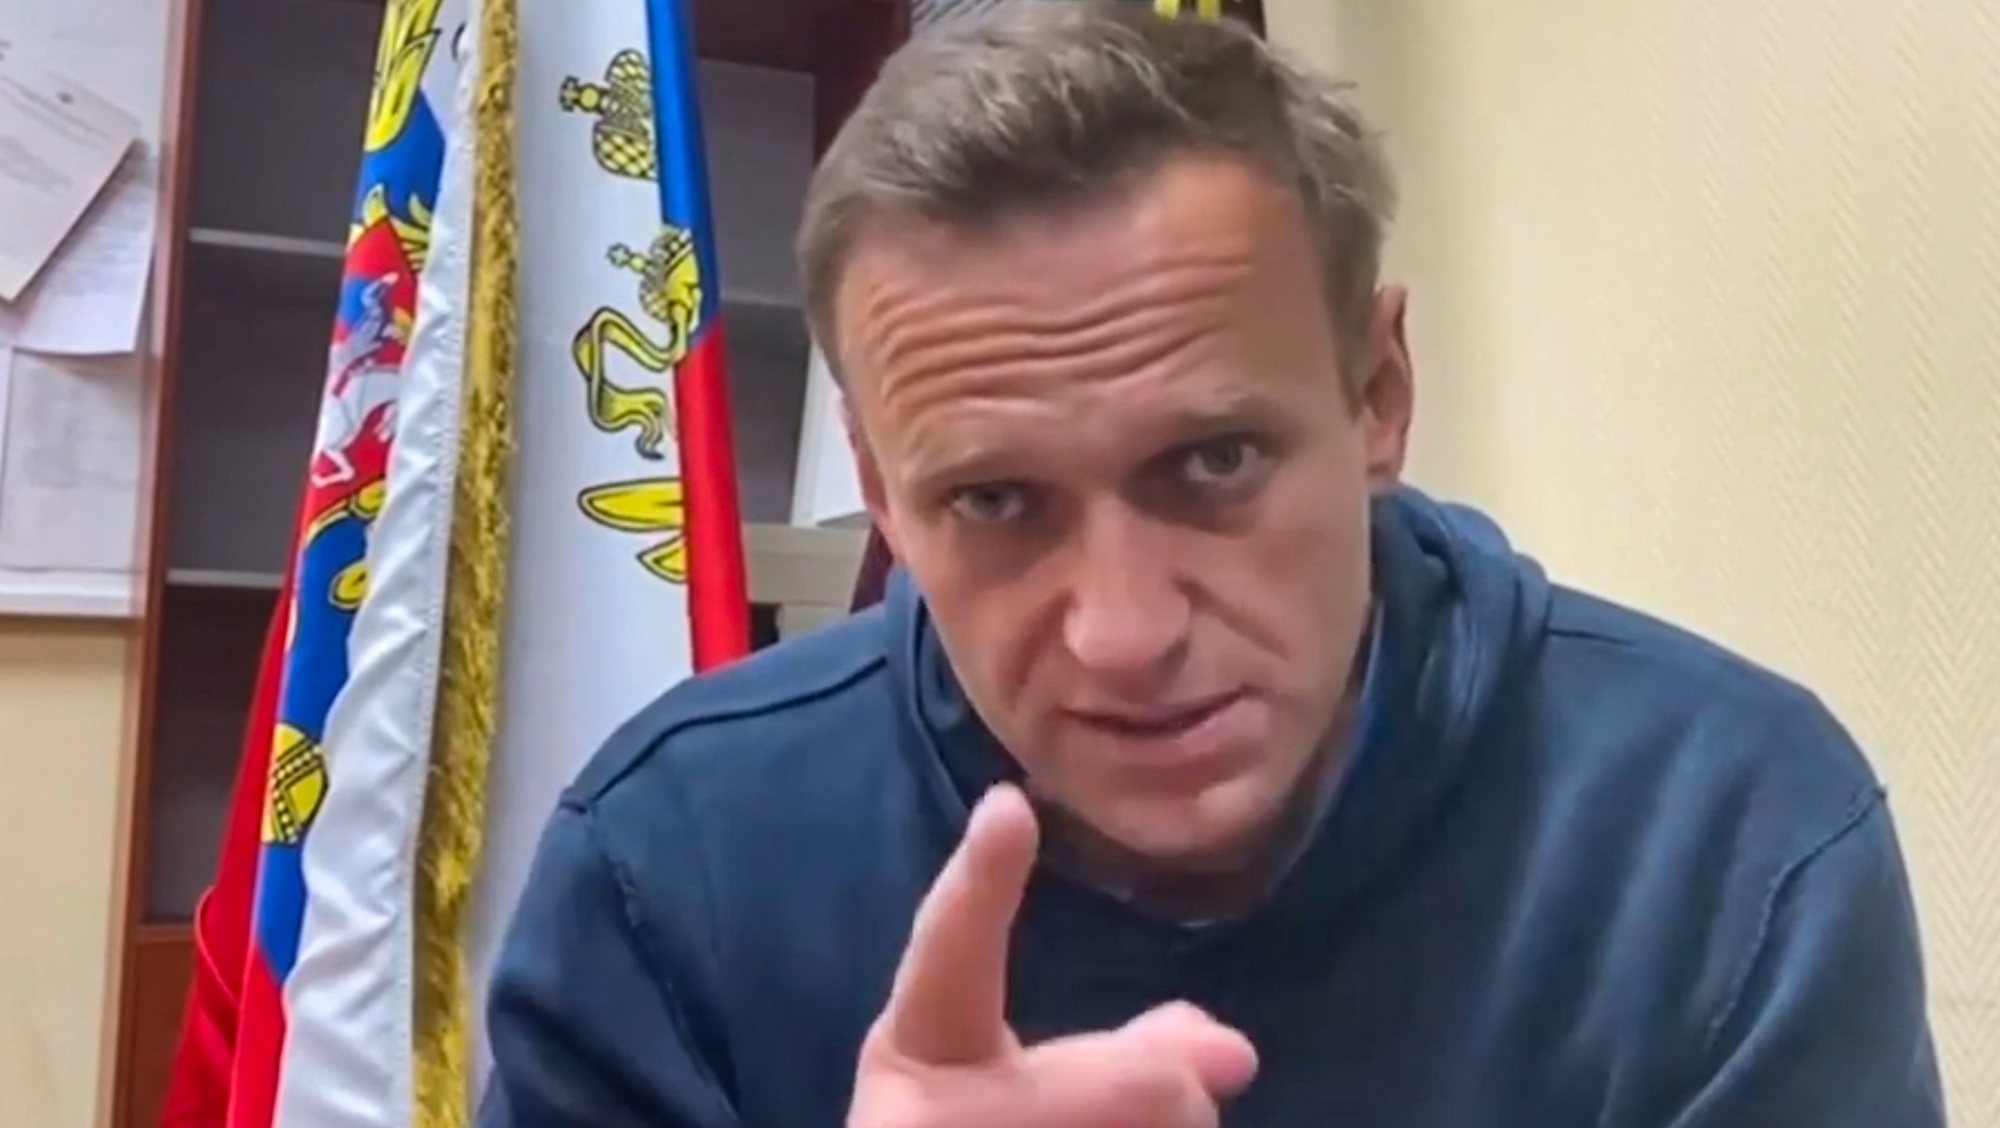 epa08946668 A handout still image taken from a handout video footage posted in the Instagram account of Alexei Navalny shows Russian opposition leader and anti-corruption activist Alexei Navalny after a court hearing at a police station in Khimki outside Moscow, Russia, 18 January 2021. A judge on 18 January ruled that Navalny remains in custody for 30 days after his airport arrest on 17 January 2020 following his arrival from Germany.  EPA/NAVALNY PRESS TEAM / HANDOUT  HANDOUT EDITORIAL USE ONLY/NO SALES